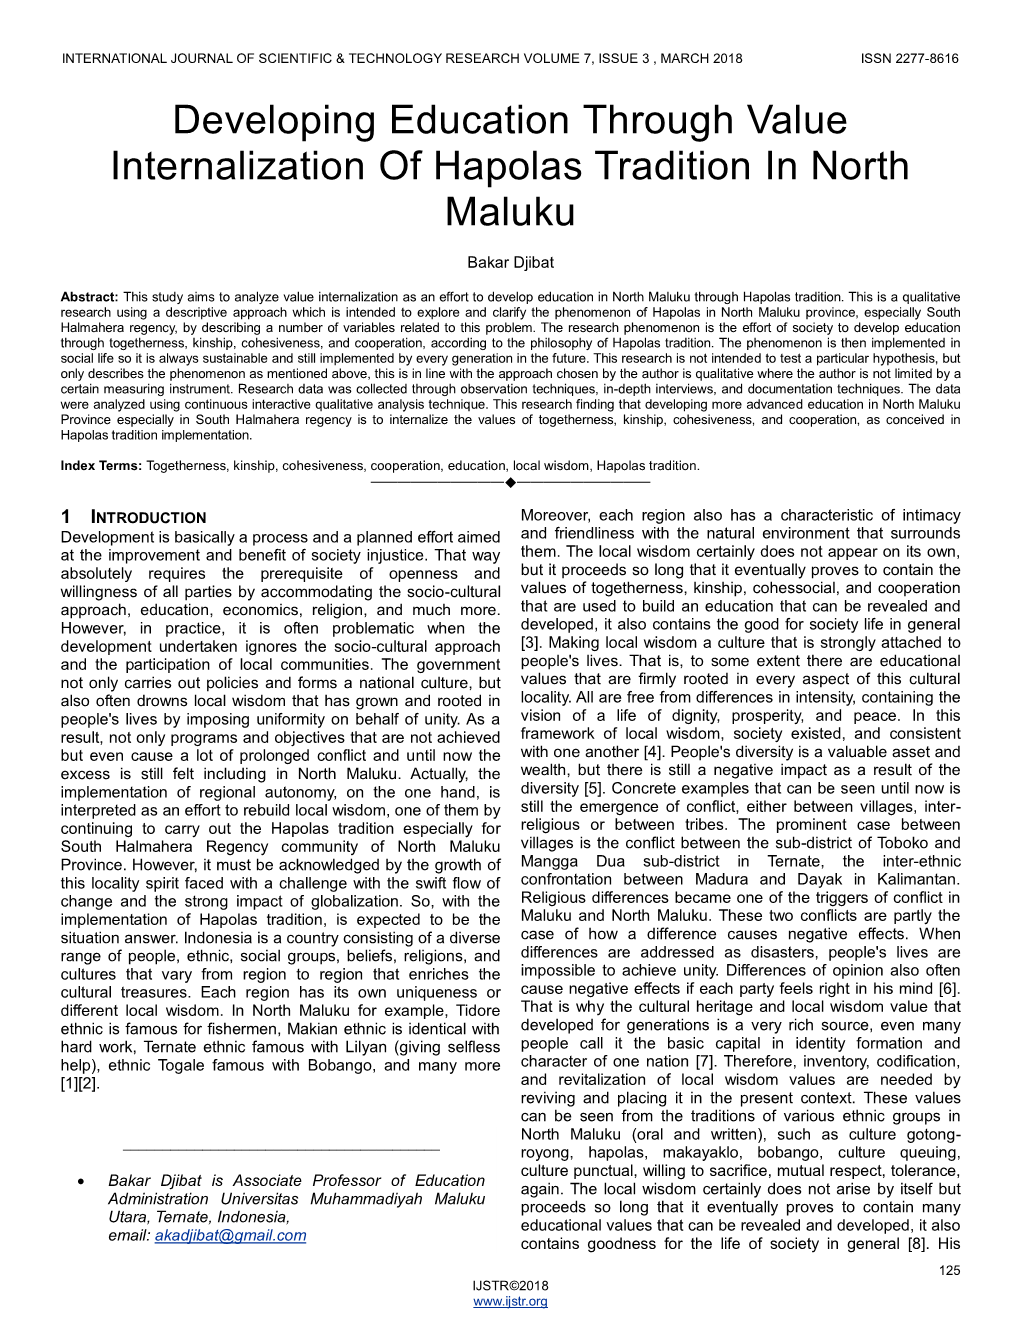 Developing Education Through Value Internalization of Hapolas Tradition in North Maluku